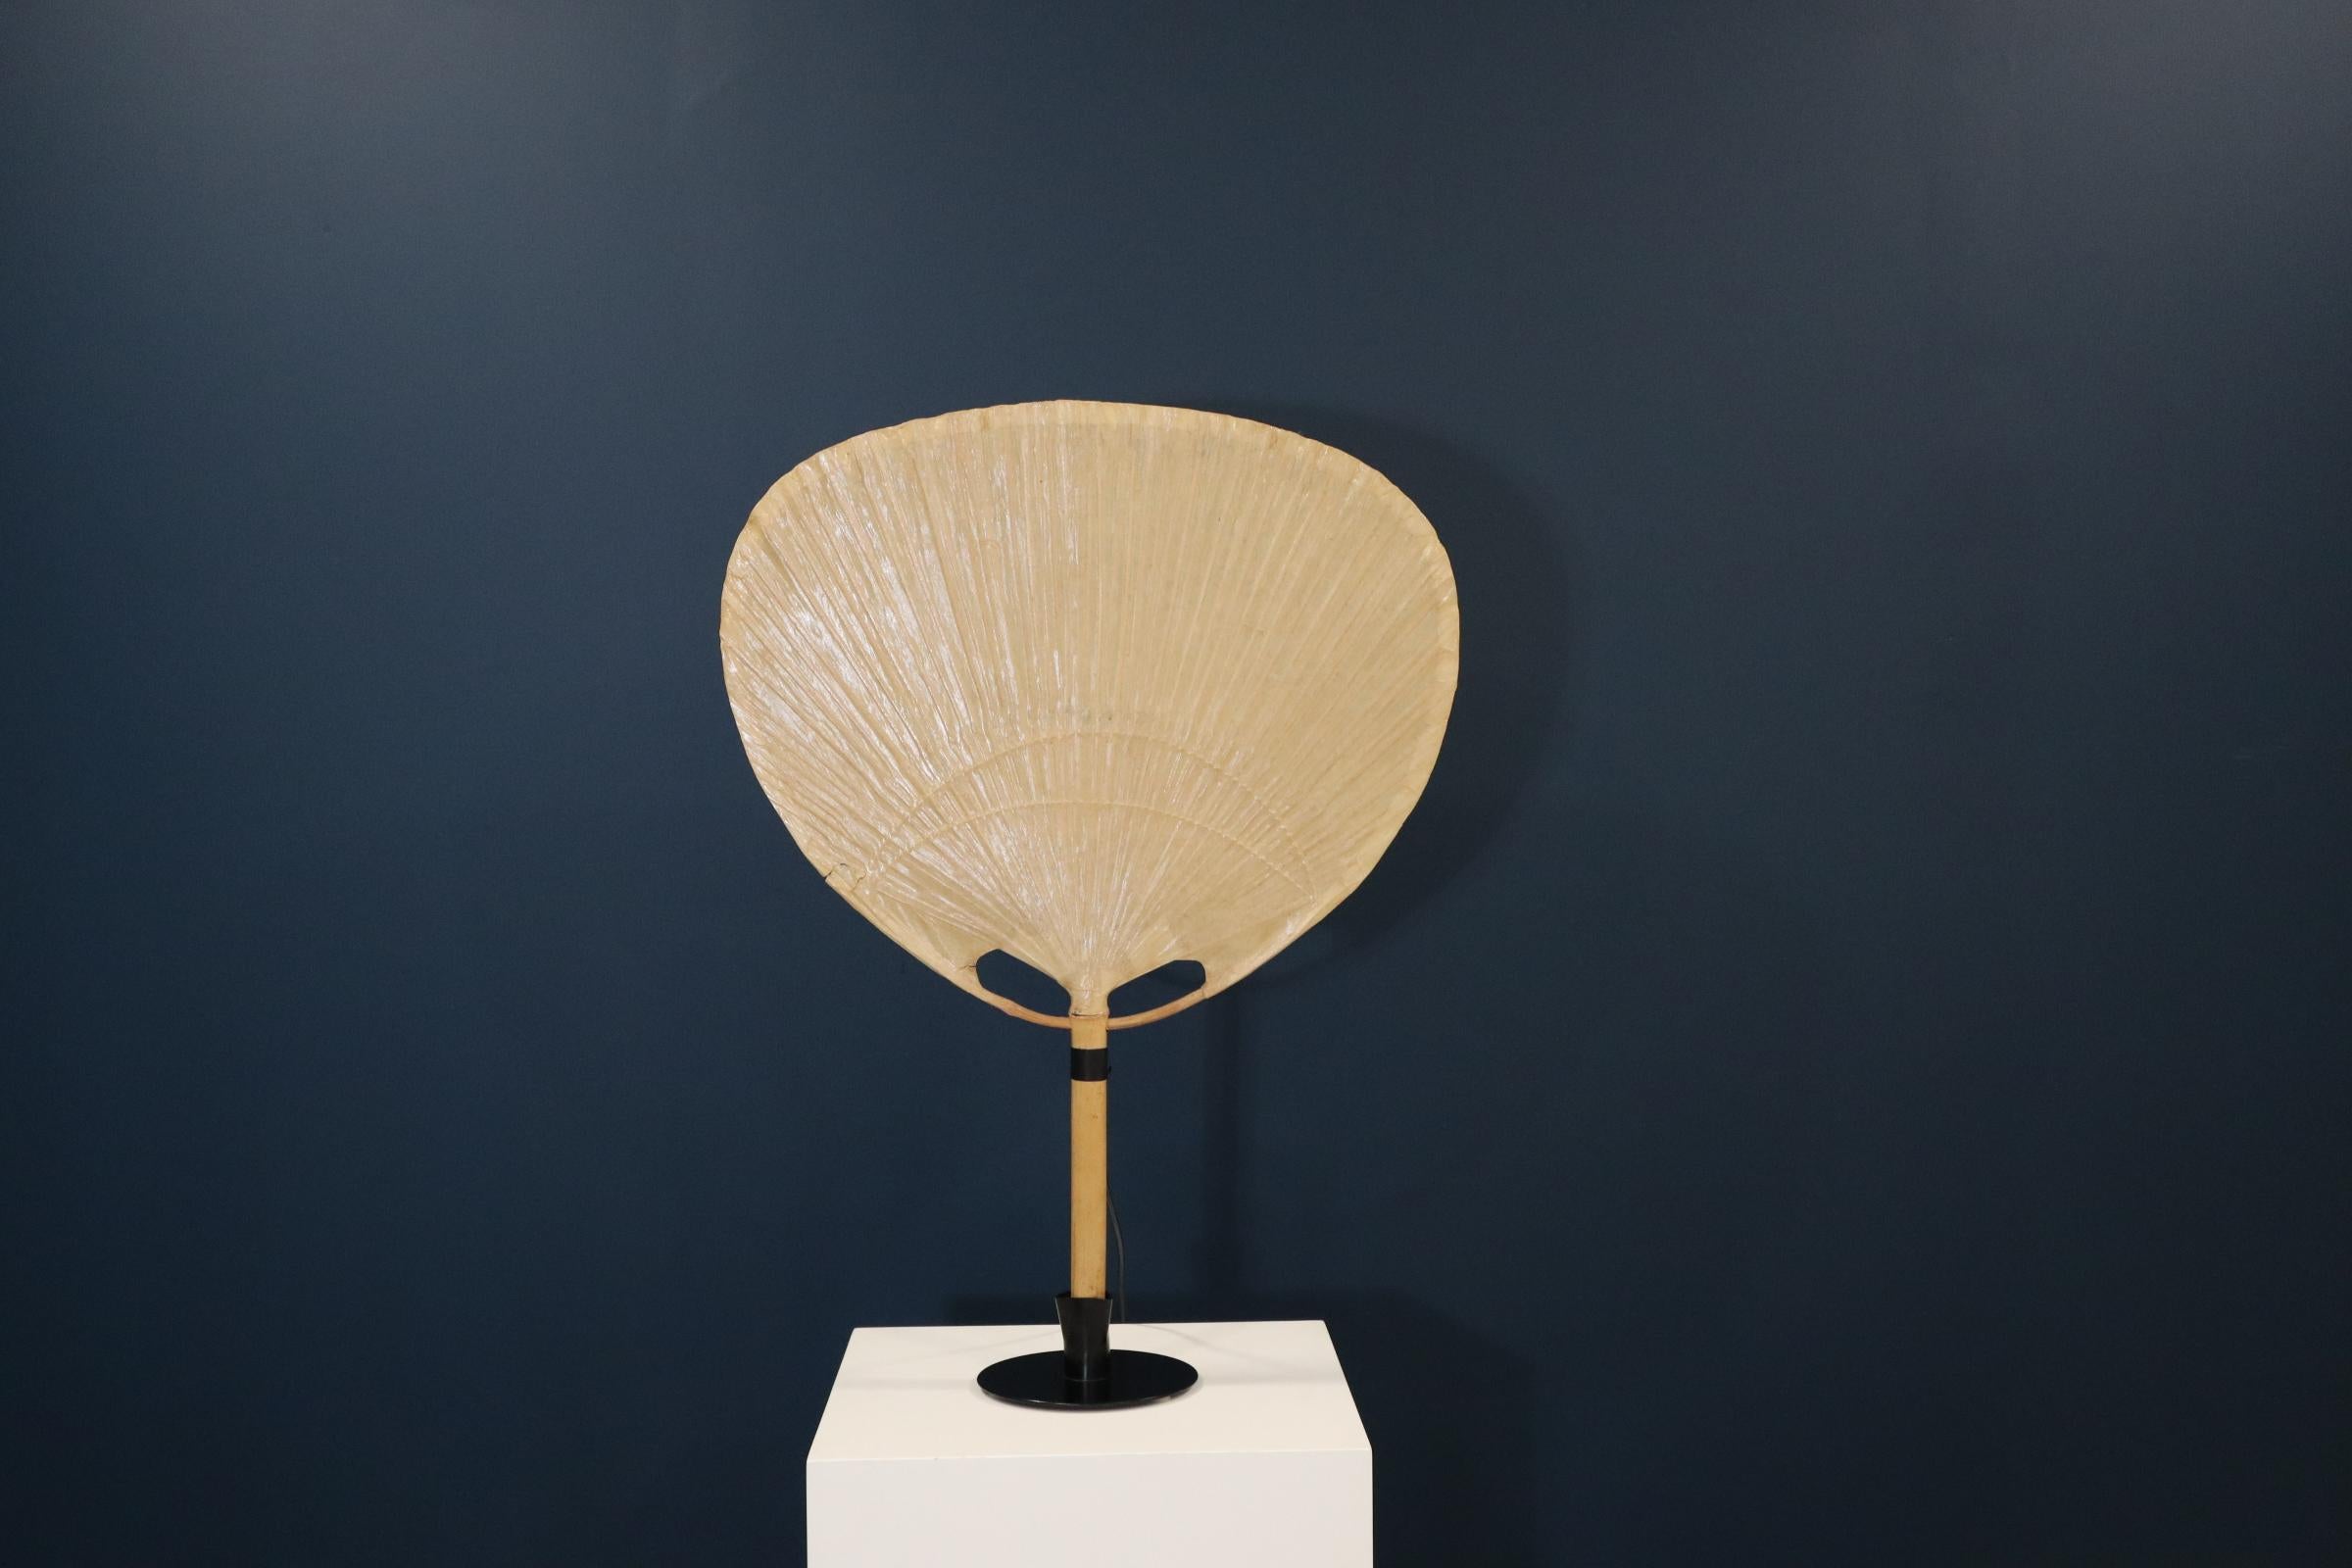 Uchiwa III wall & table lamp by Ingo Maurer, 1970s

This stunning Uchiwa lamp was designed by Ingo Maurer, in Germany, 1973. It is the larger size from the table lamp series with its rare and original metal holder, the Uchiwa can also be used as a